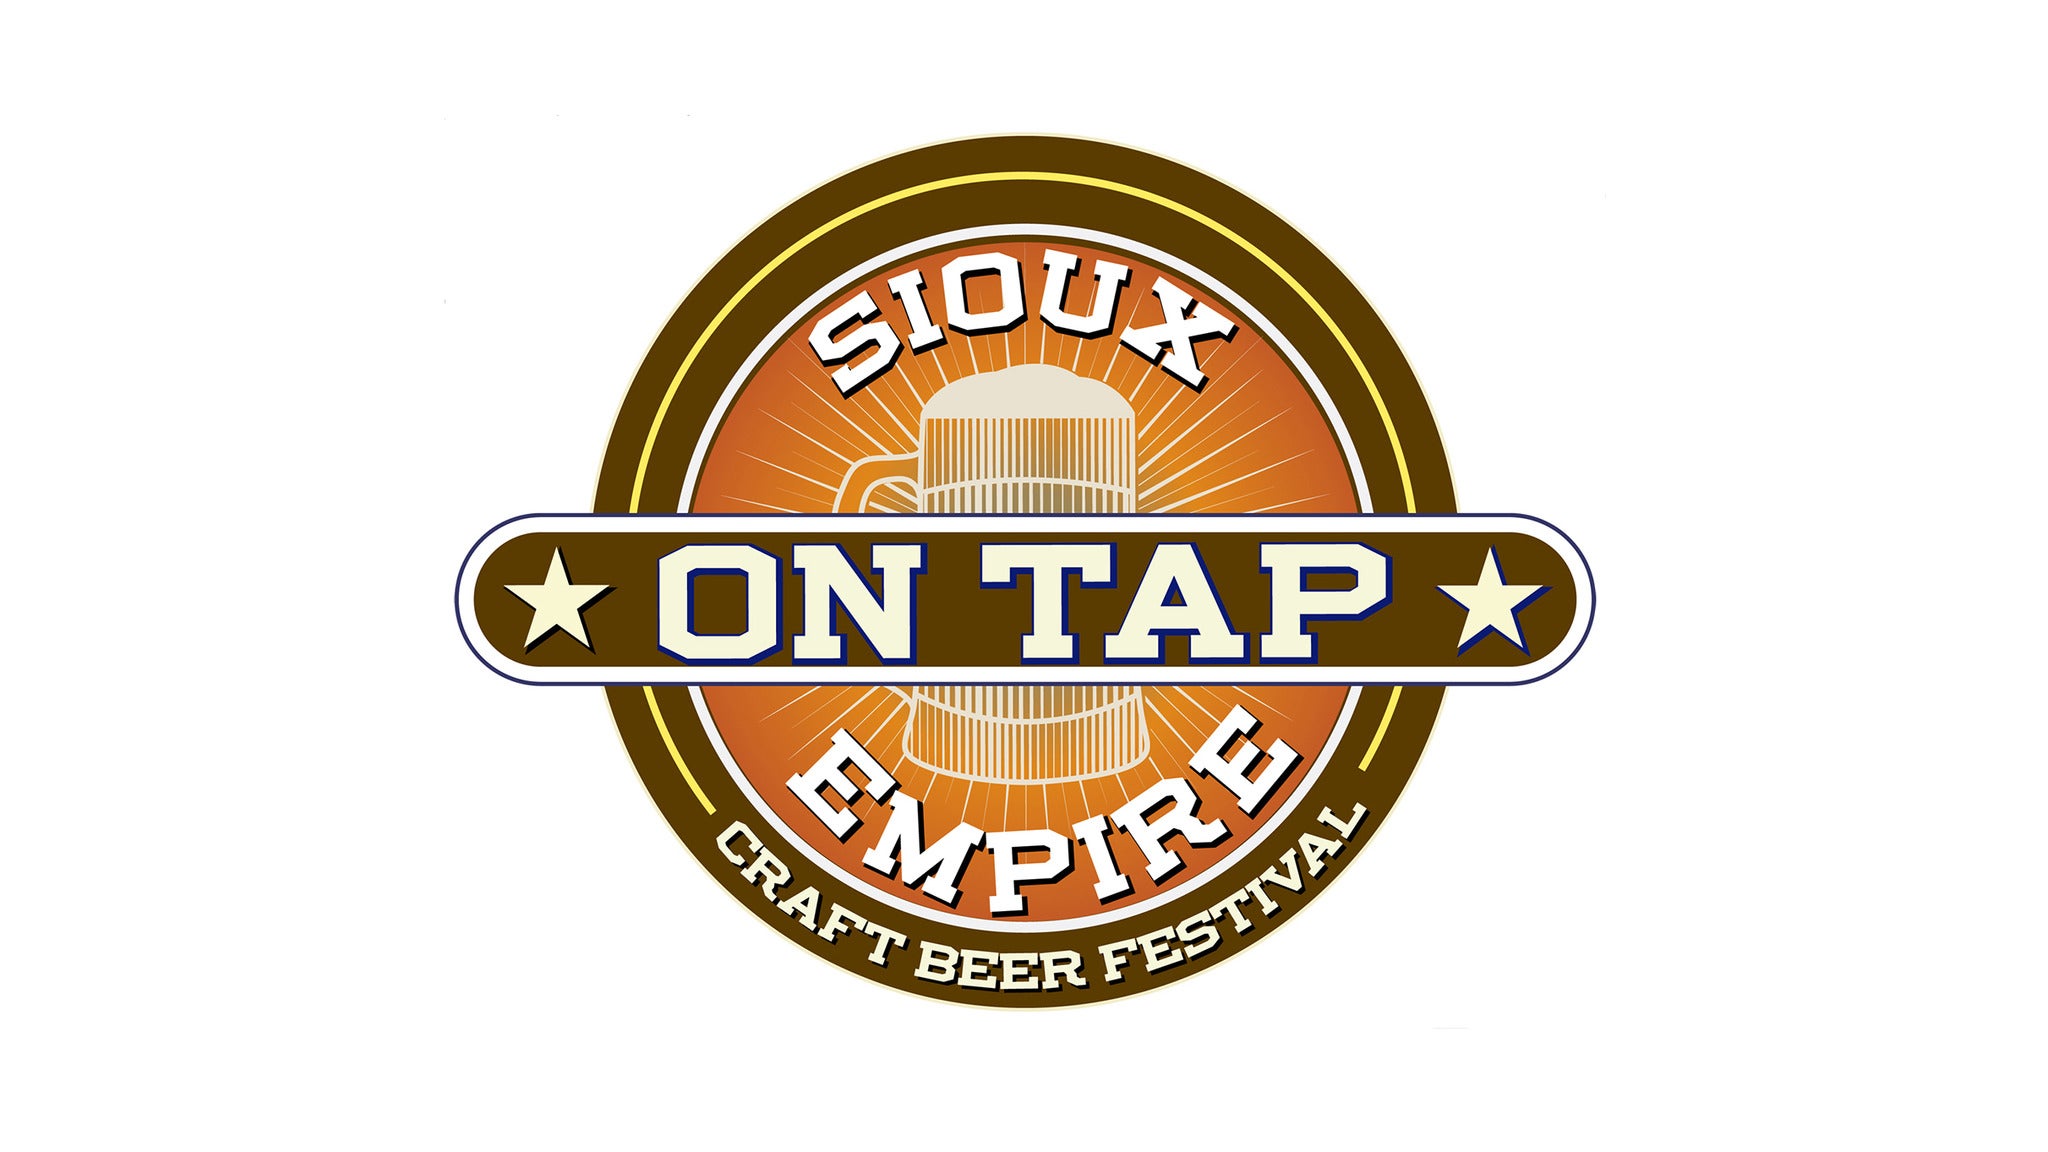 Sioux Empire On Tap 2023 VIP in Sioux Falls promo photo for Sioux Empire on Tap presale offer code